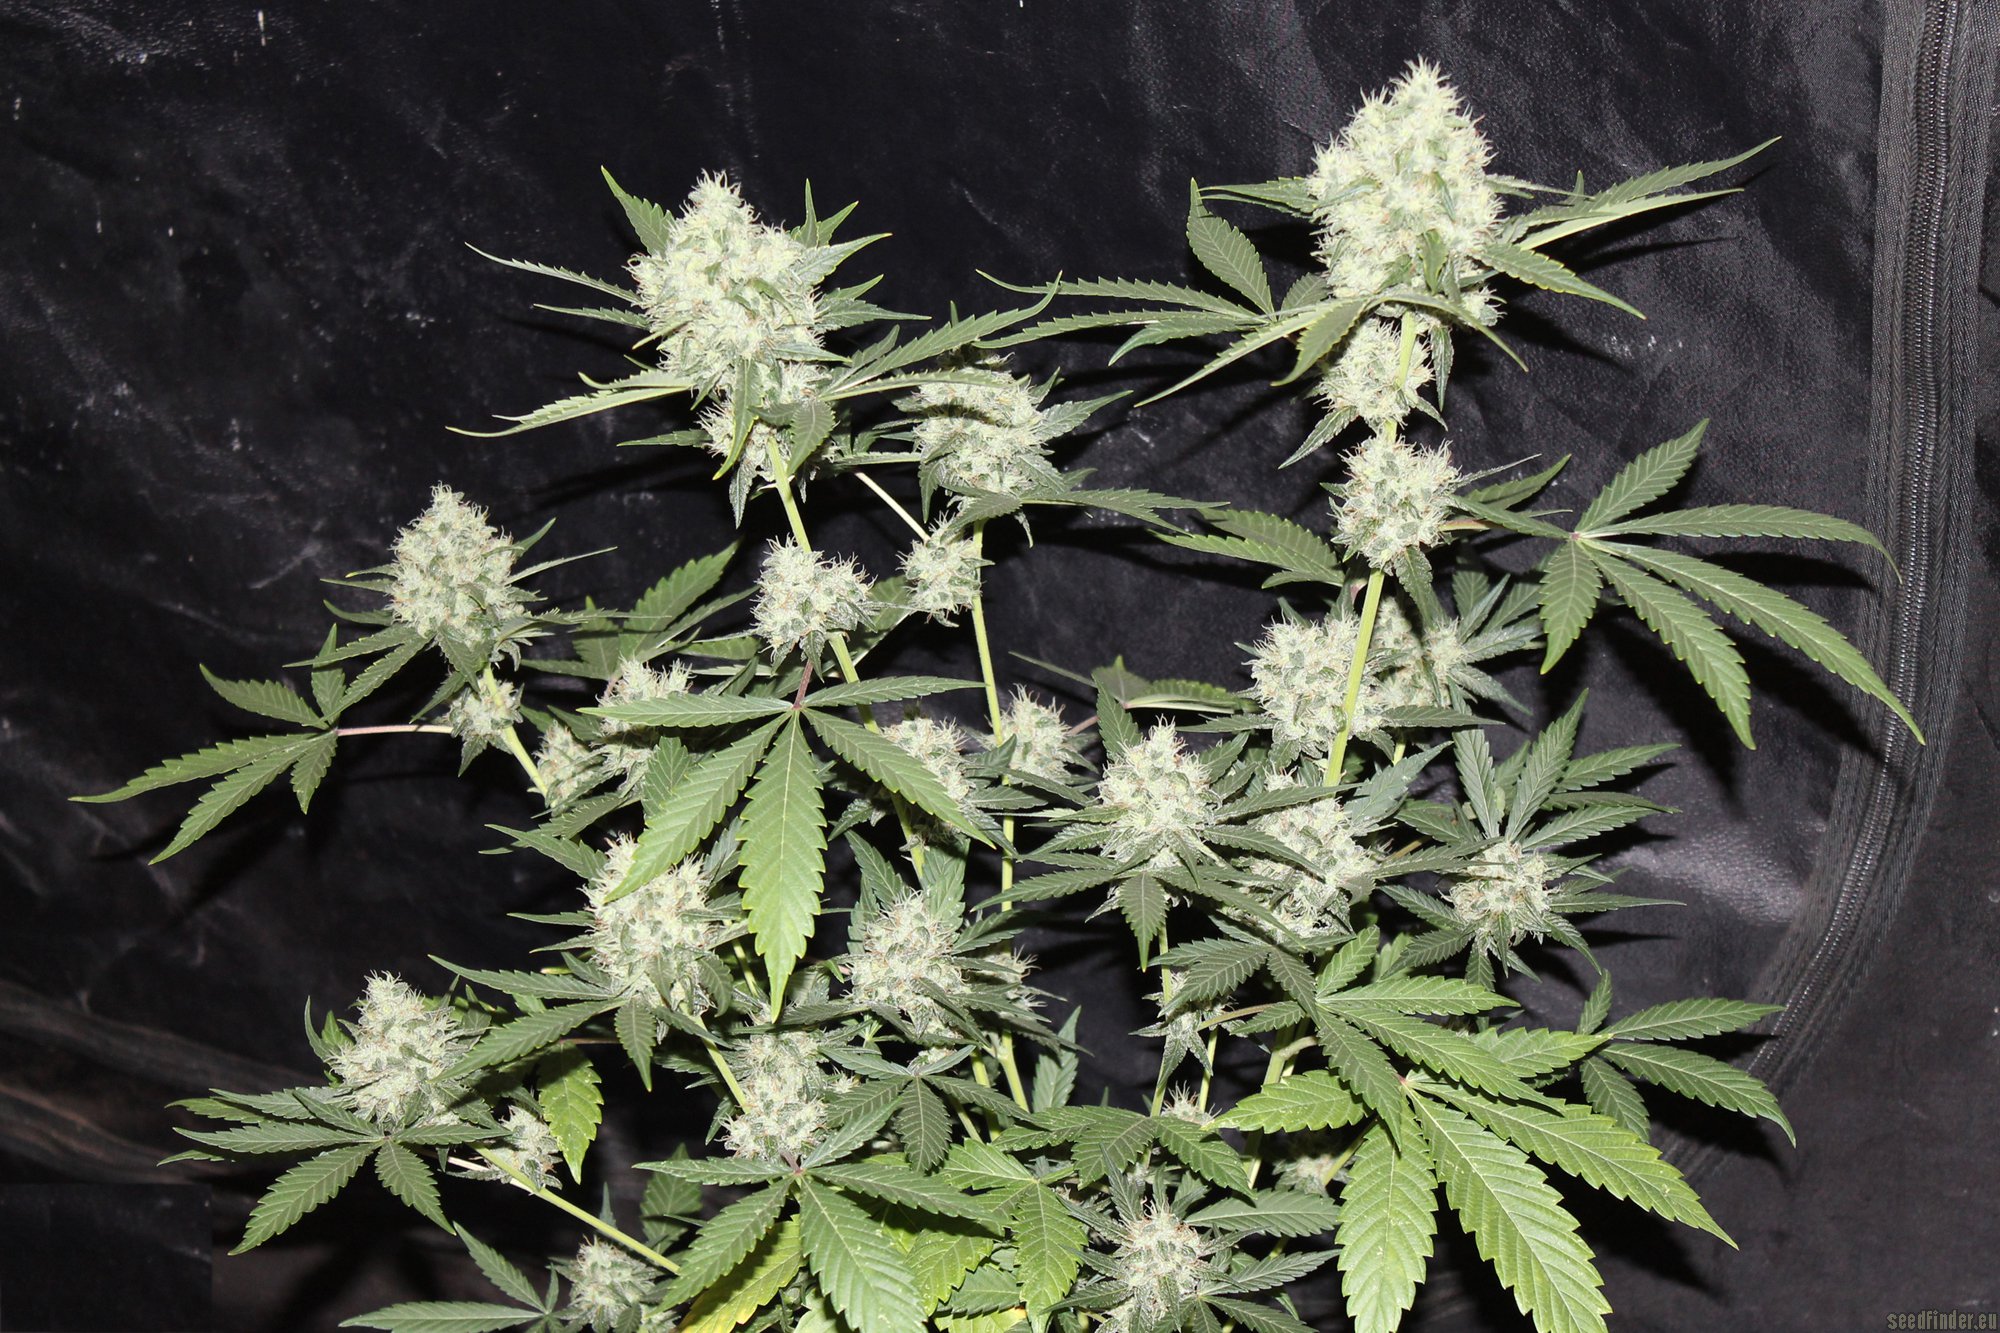 Strain-Gallery: Northern Lights #5 X Seeds) PIC #08101432968129547 by hempi